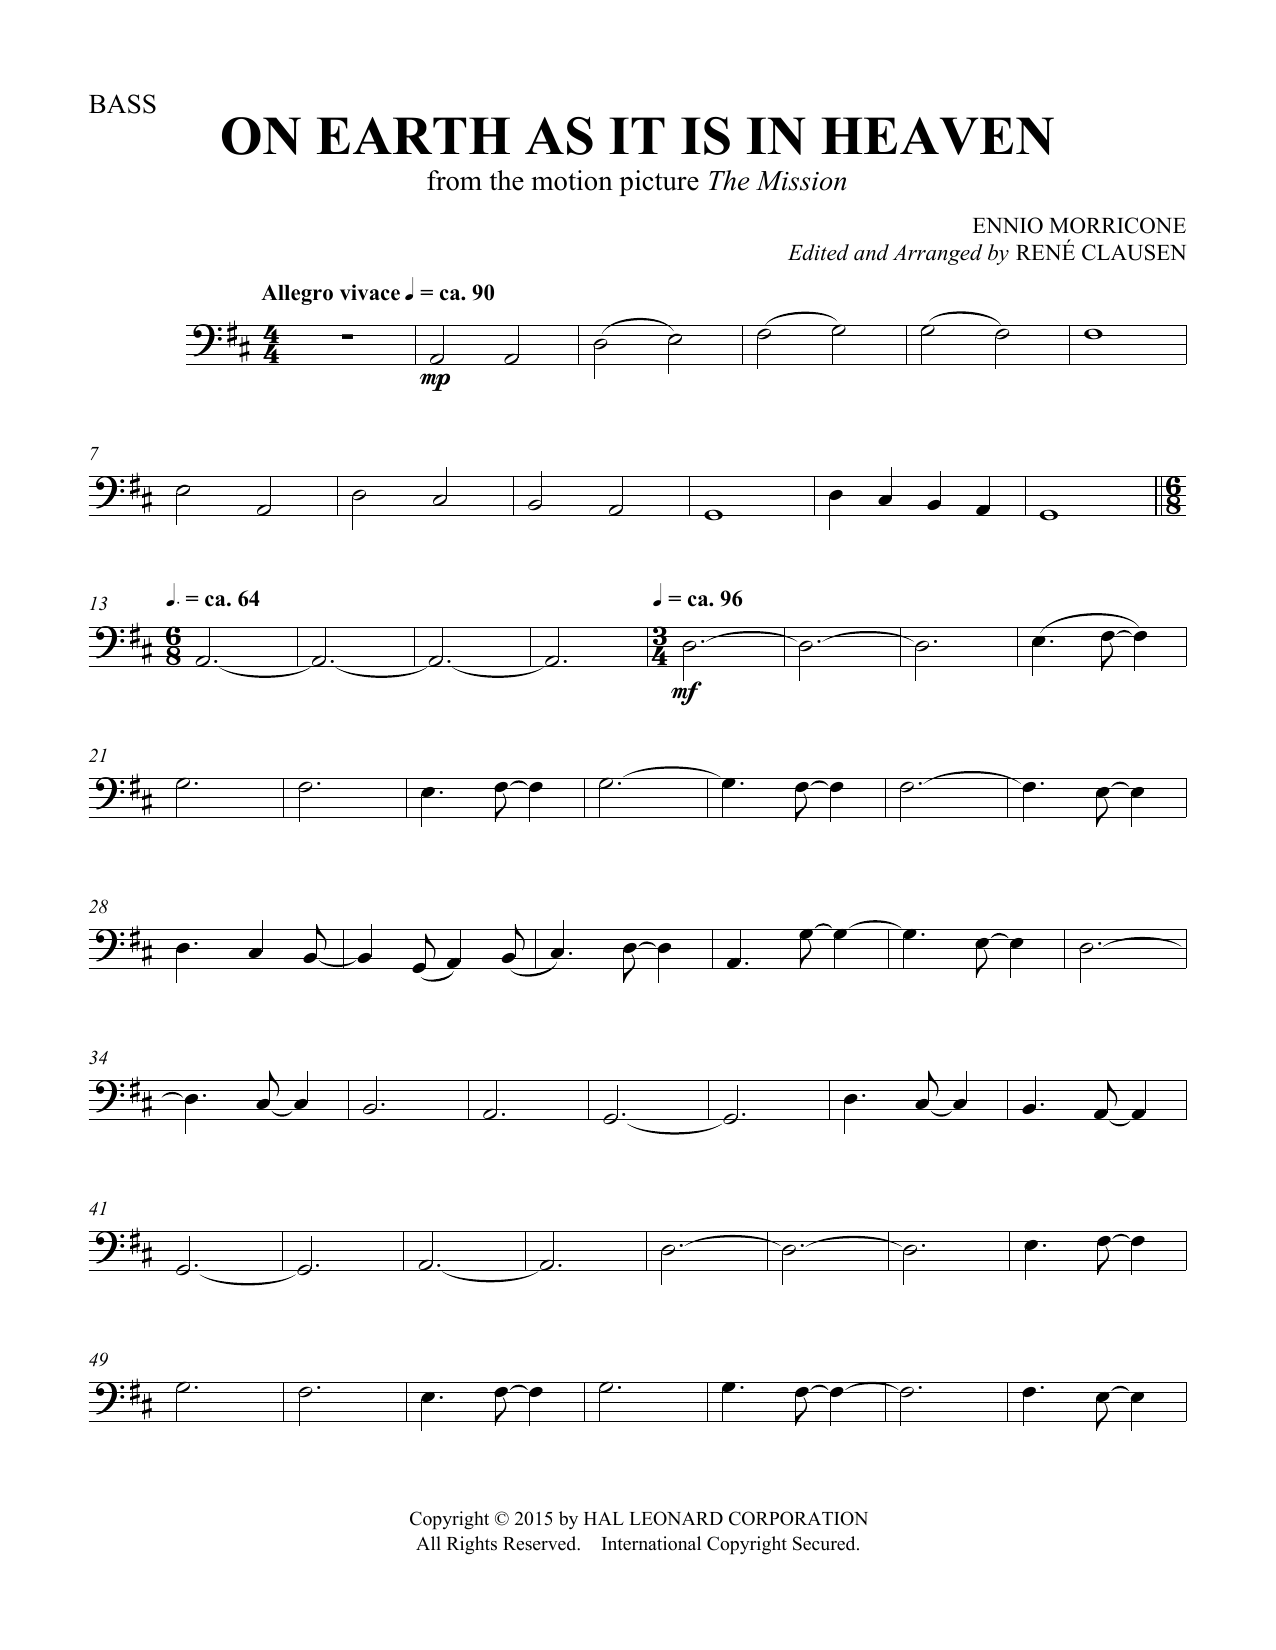 Rene Clausen On Earth As It Is In Heaven - Double Bass sheet music notes and chords. Download Printable PDF.